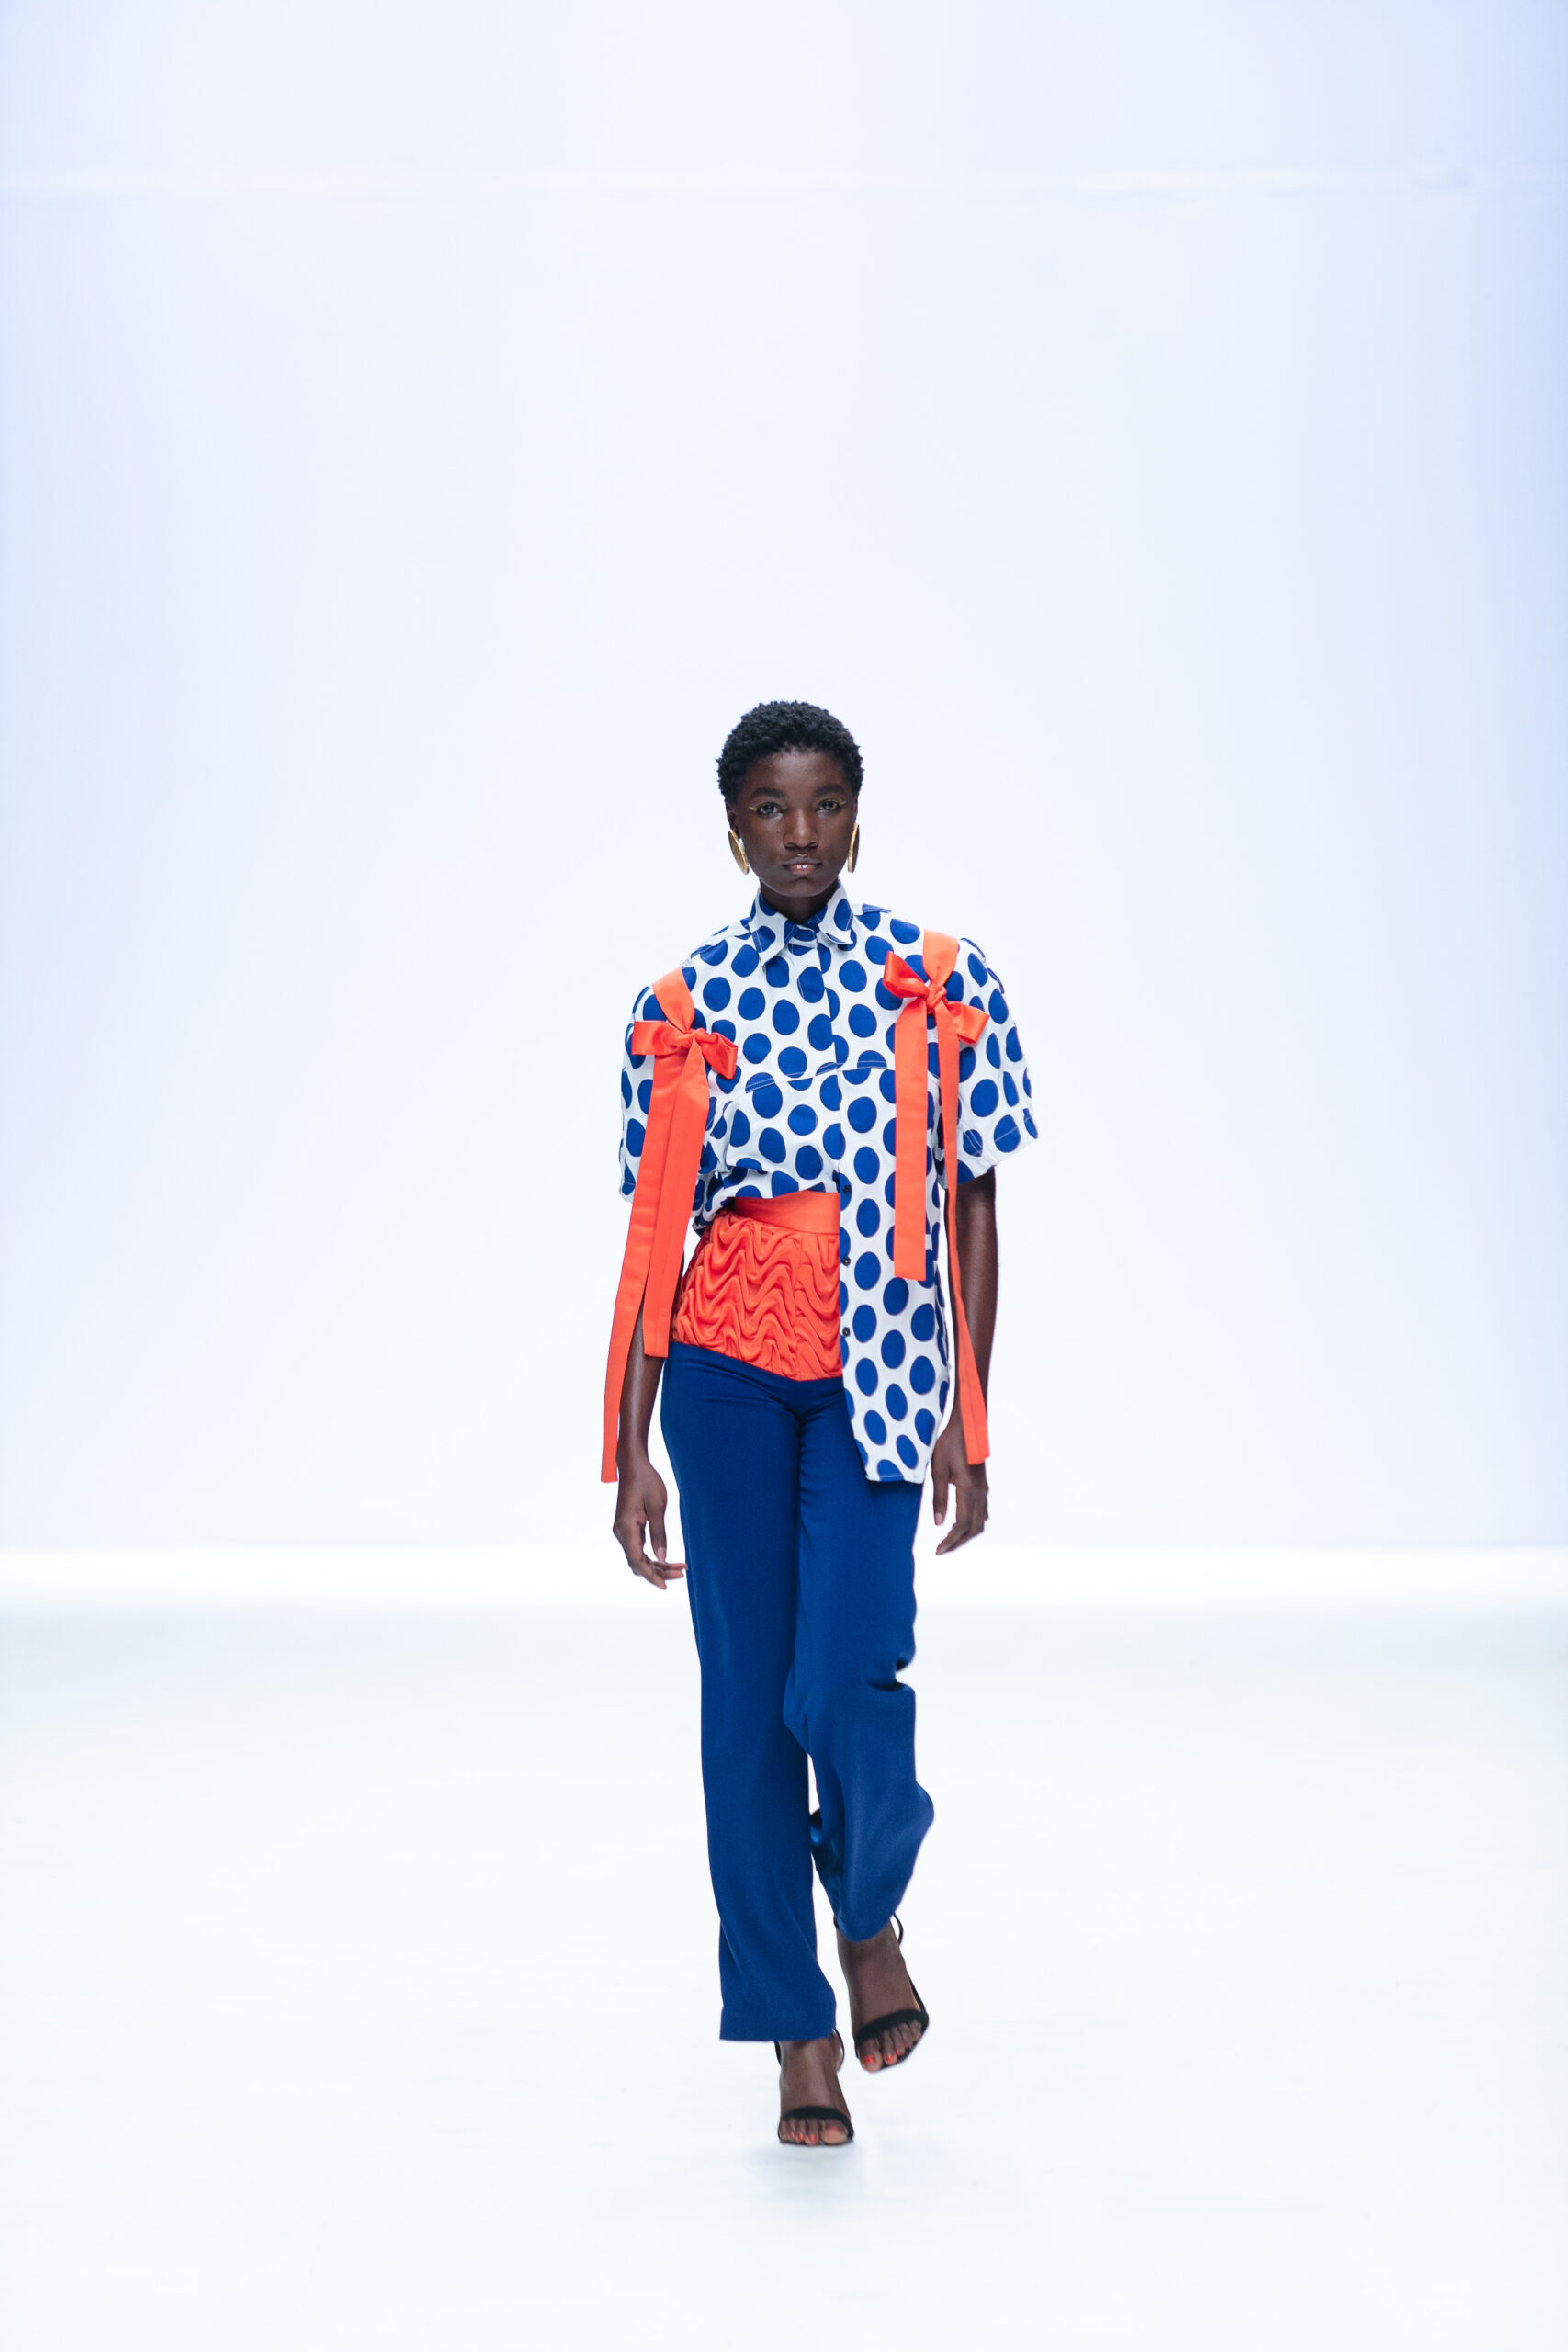 Look one from LFW's green access 2022 finalist - Meta Kay